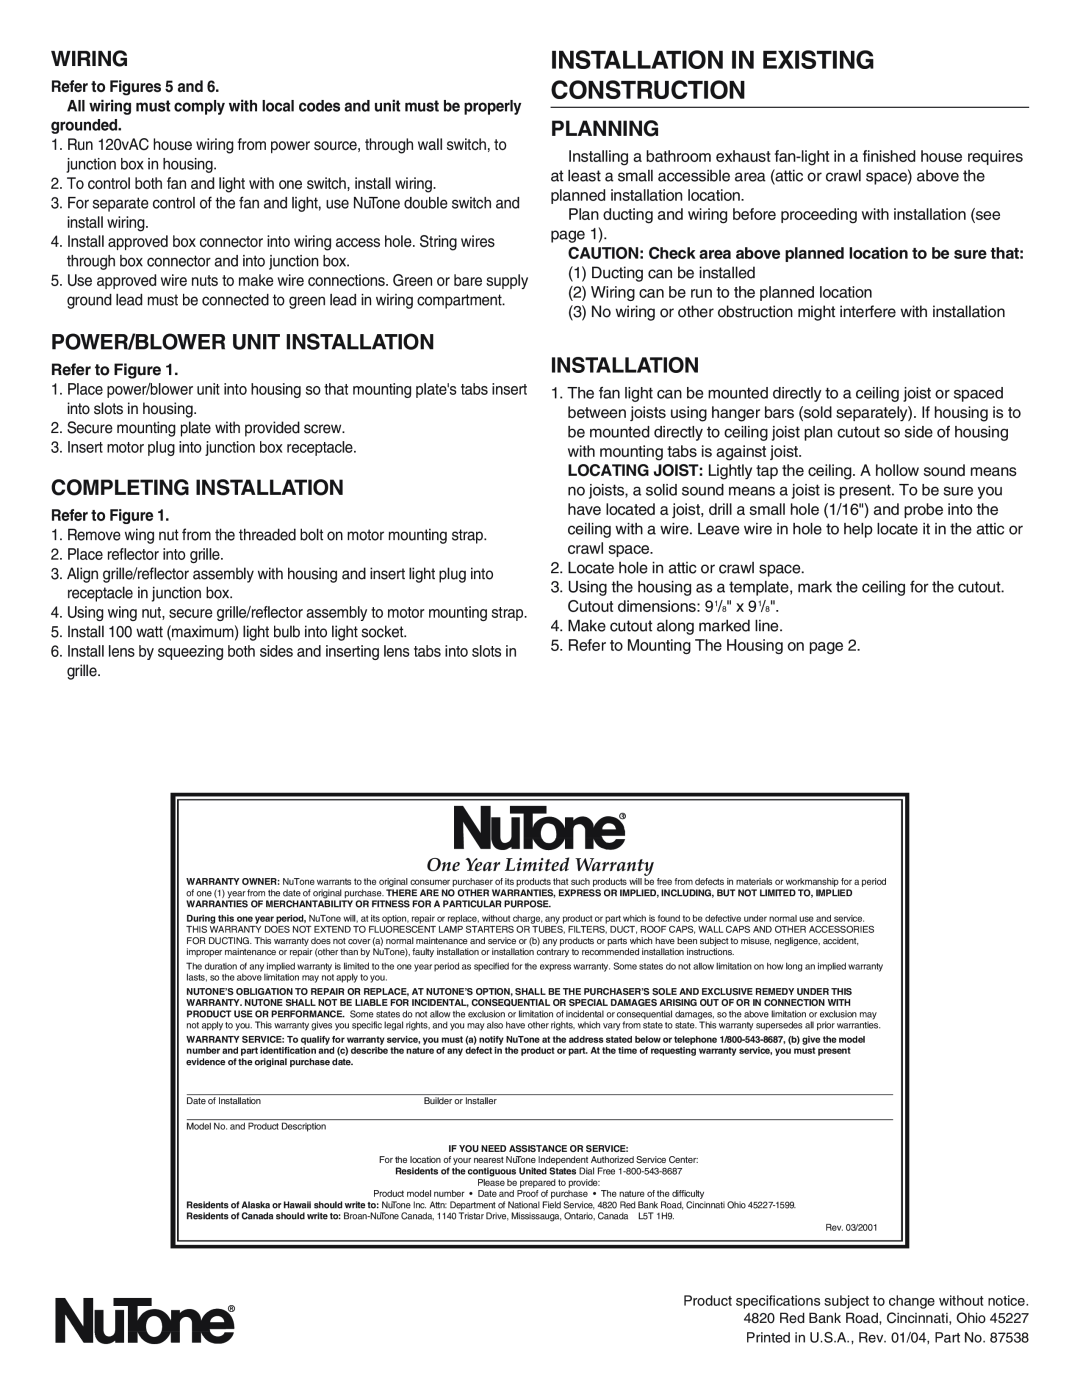 NuTone 763RLN Installation In Existing Construction, Planning, Power/Blower Unit Installation, Completing Installation 